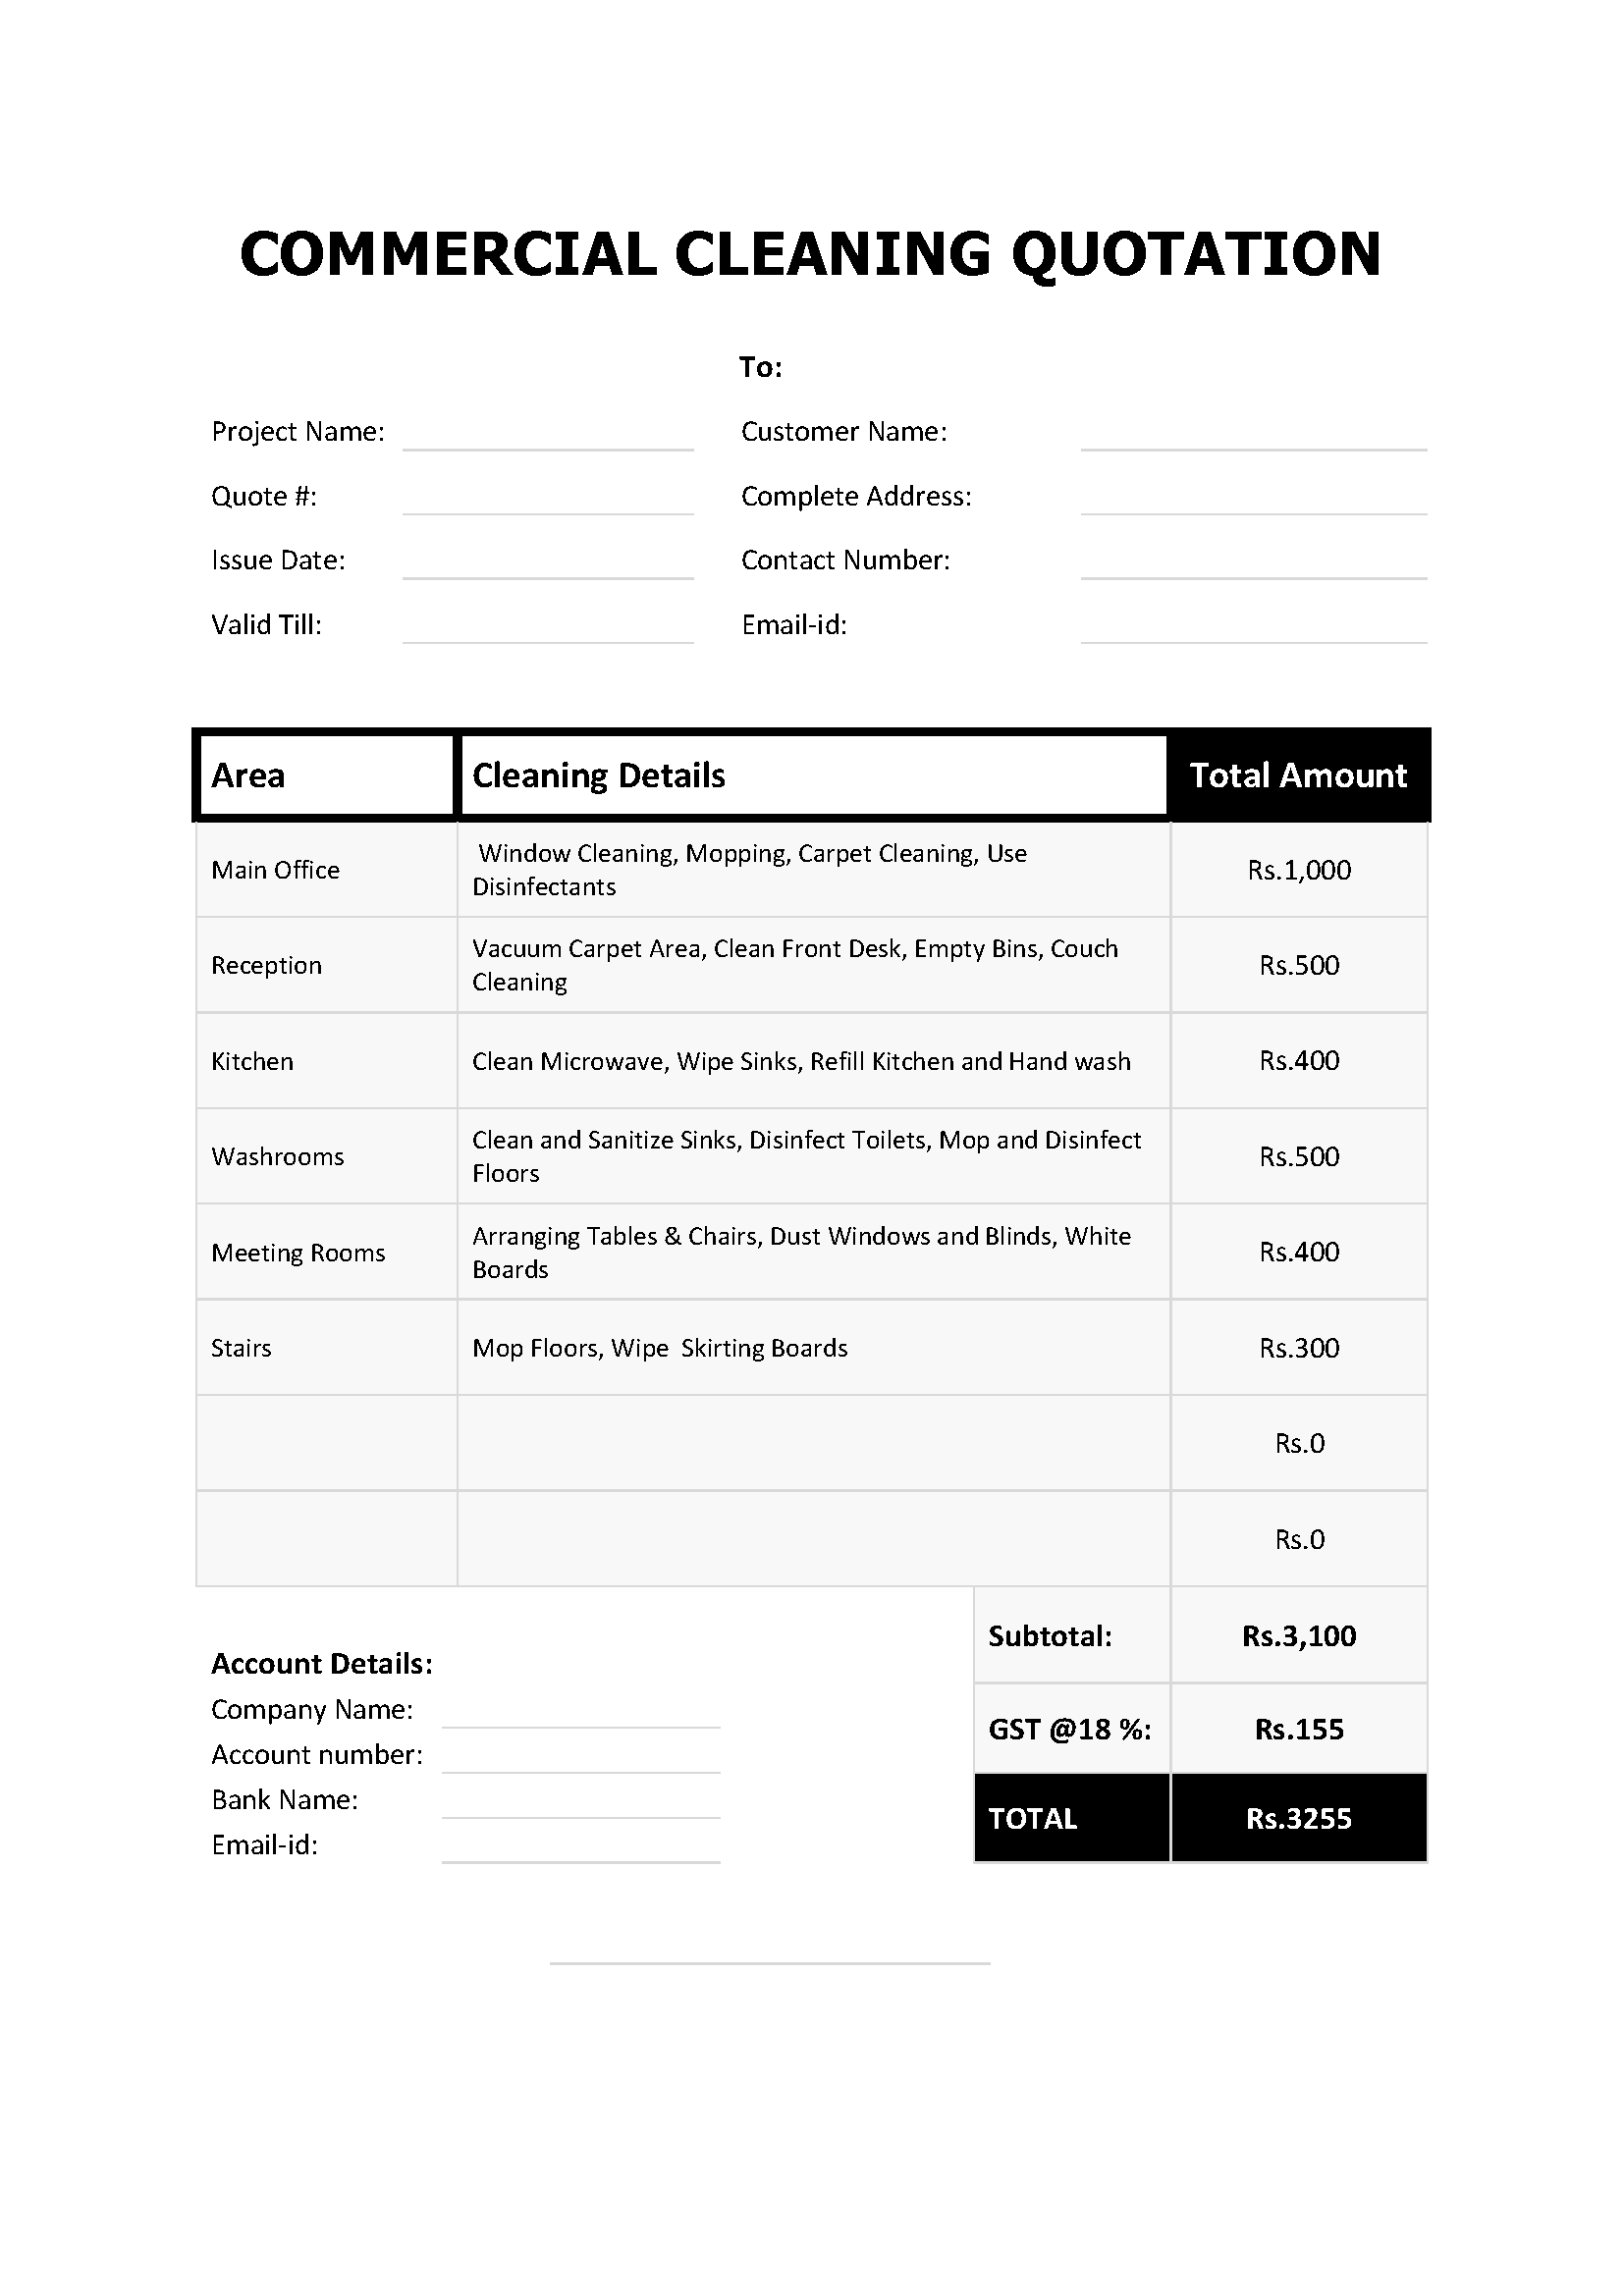 Commercial Cleaning Quotation Template